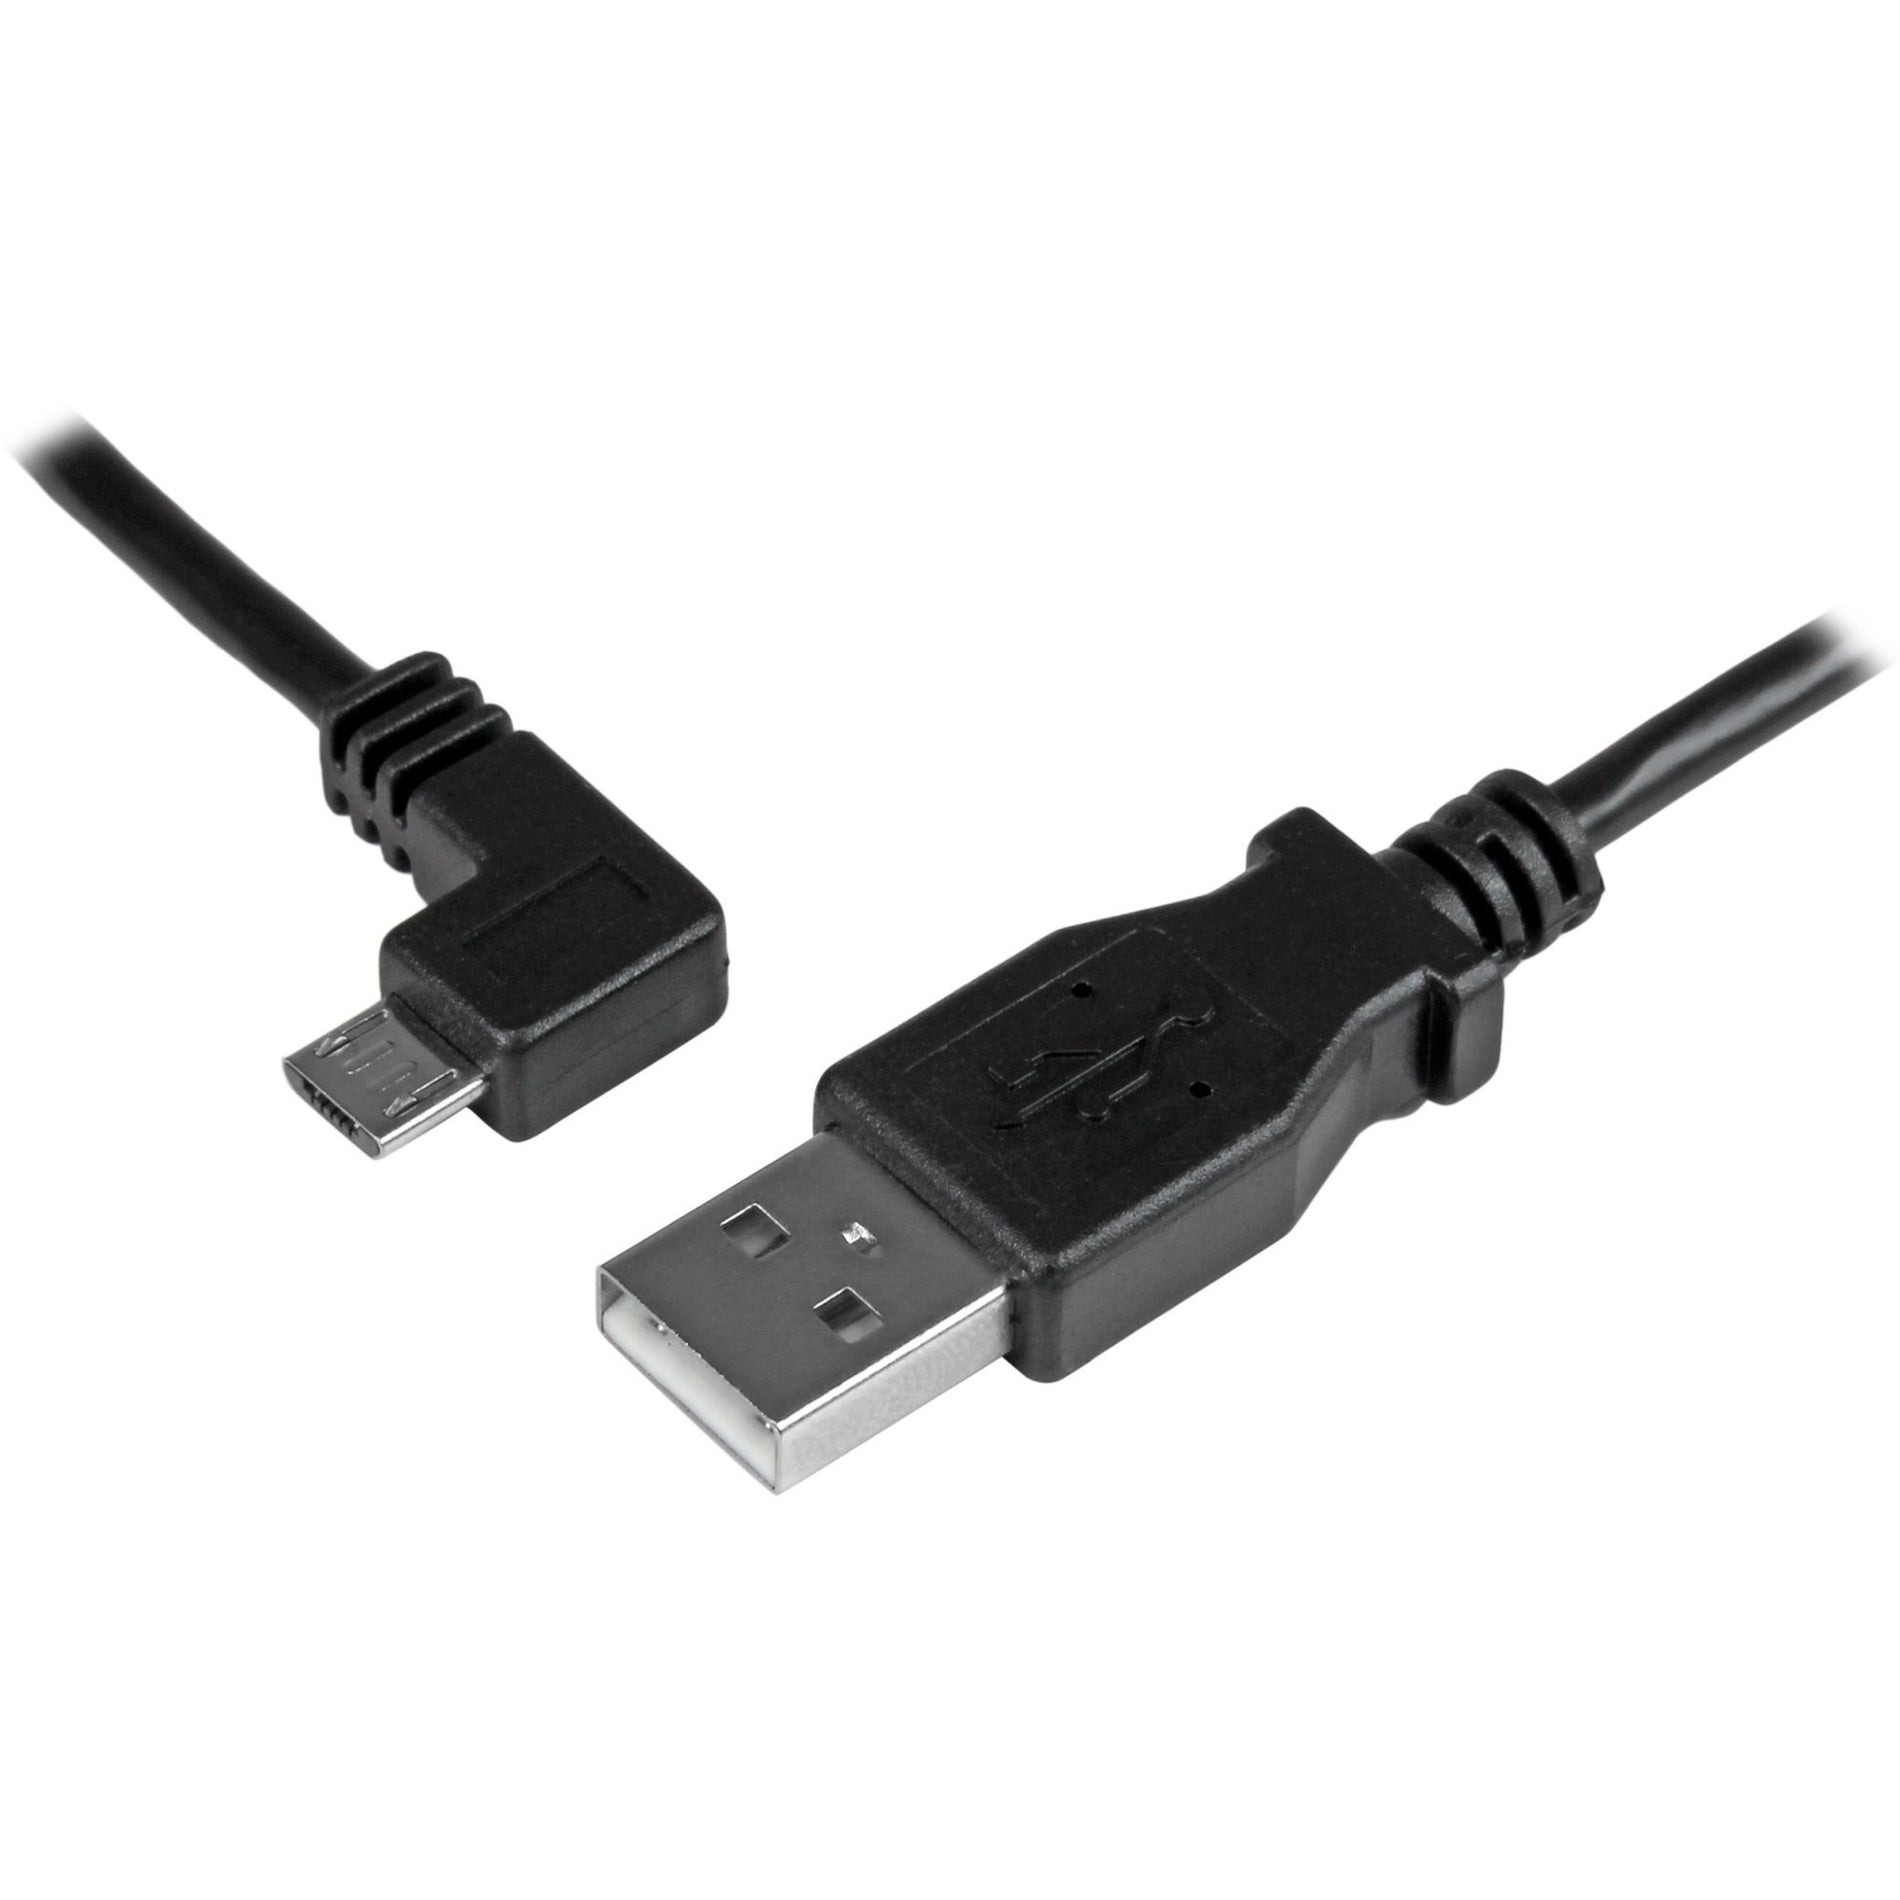 StarTech.com USBAUB50CMLA Micro-USB Charge-and-Sync Cable M/M - Left-Angle Micro-USB - 24 AWG, 0.5 m, Charge and Sync Cable